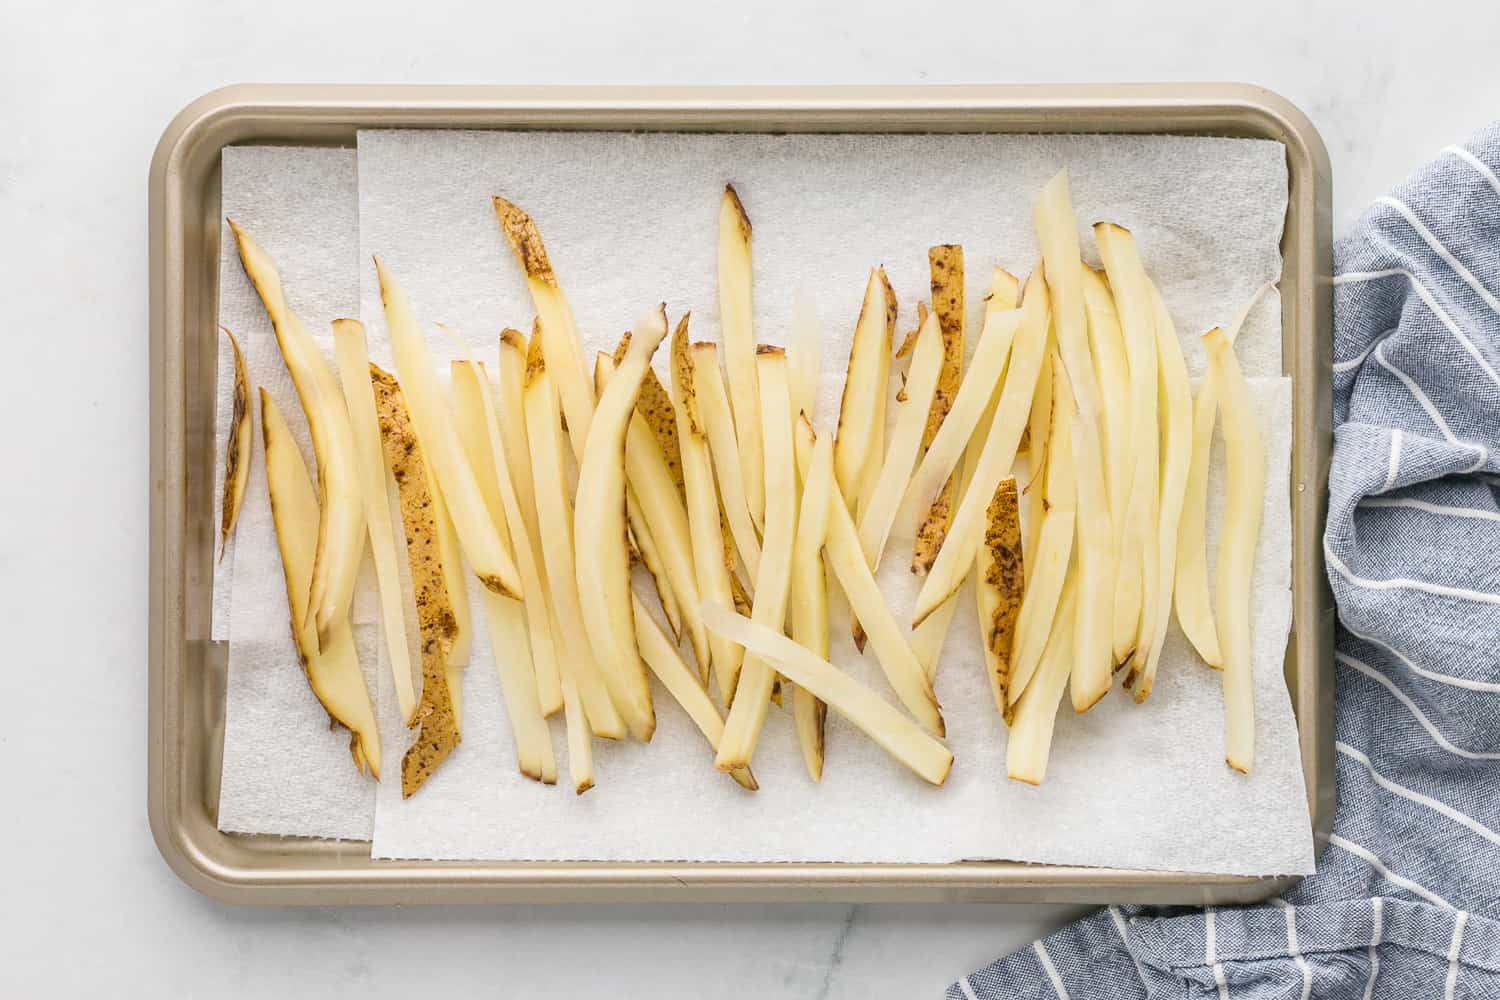 Uncooked fries being dried.